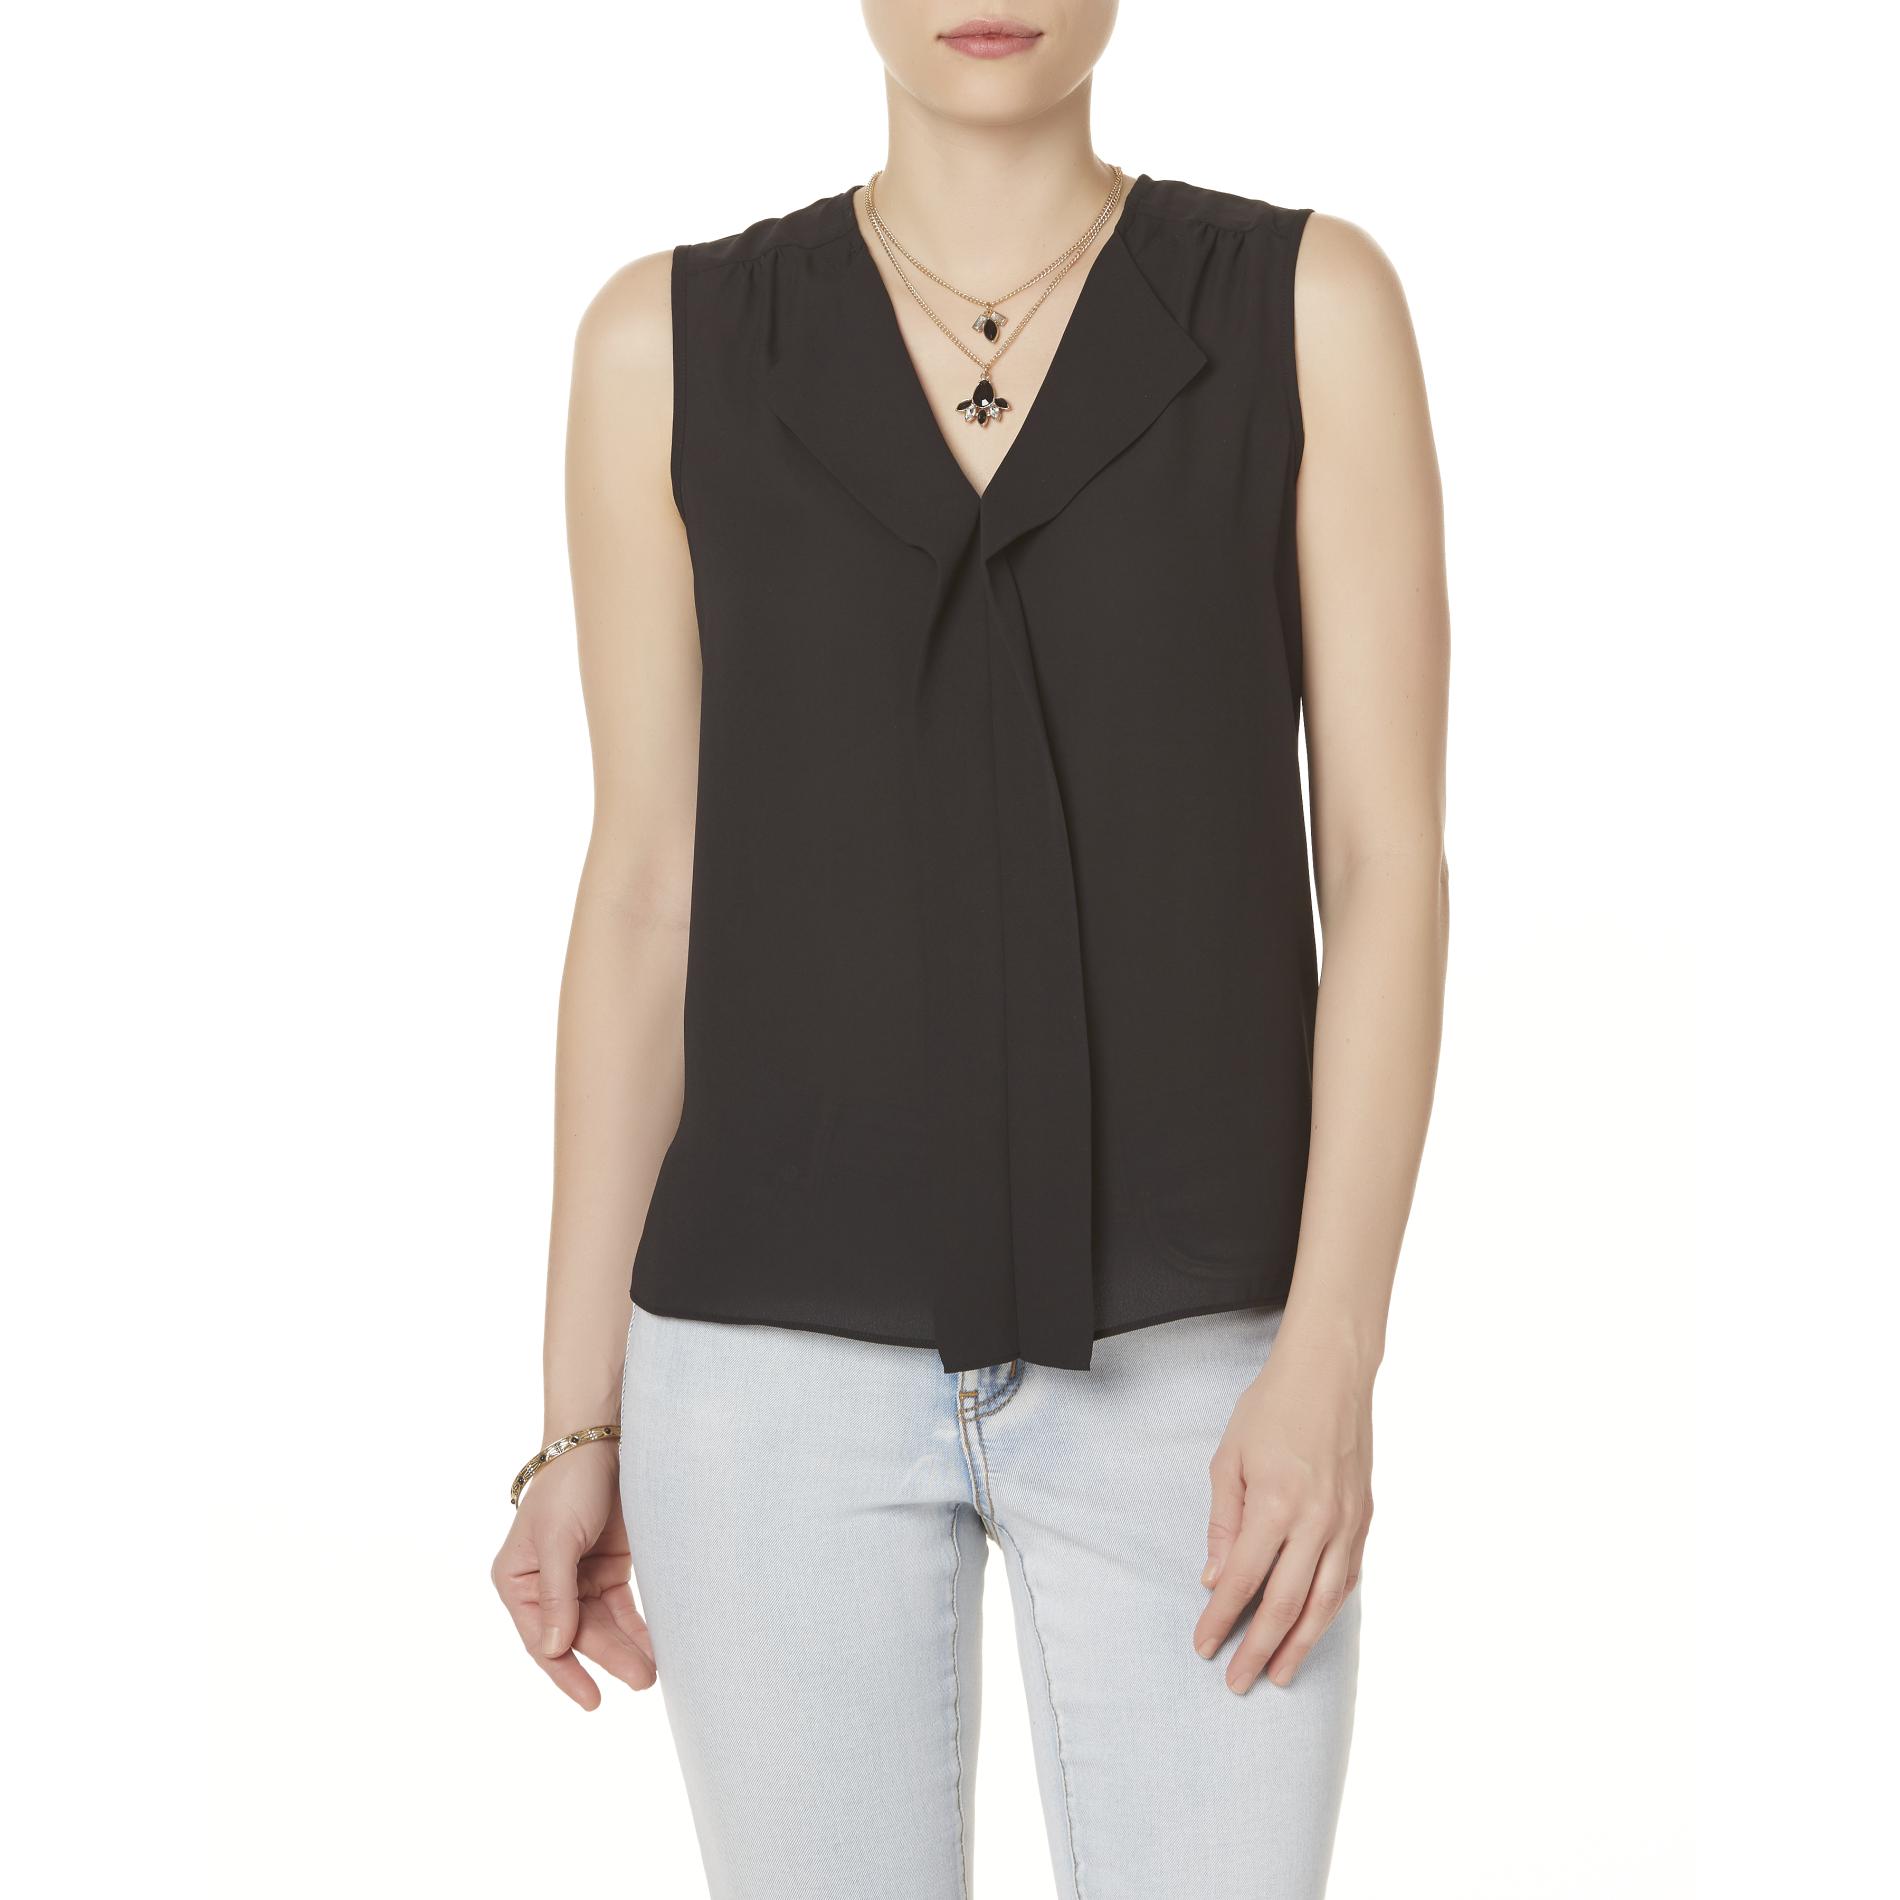 Simply Styled Women's Sleeveless Blouse